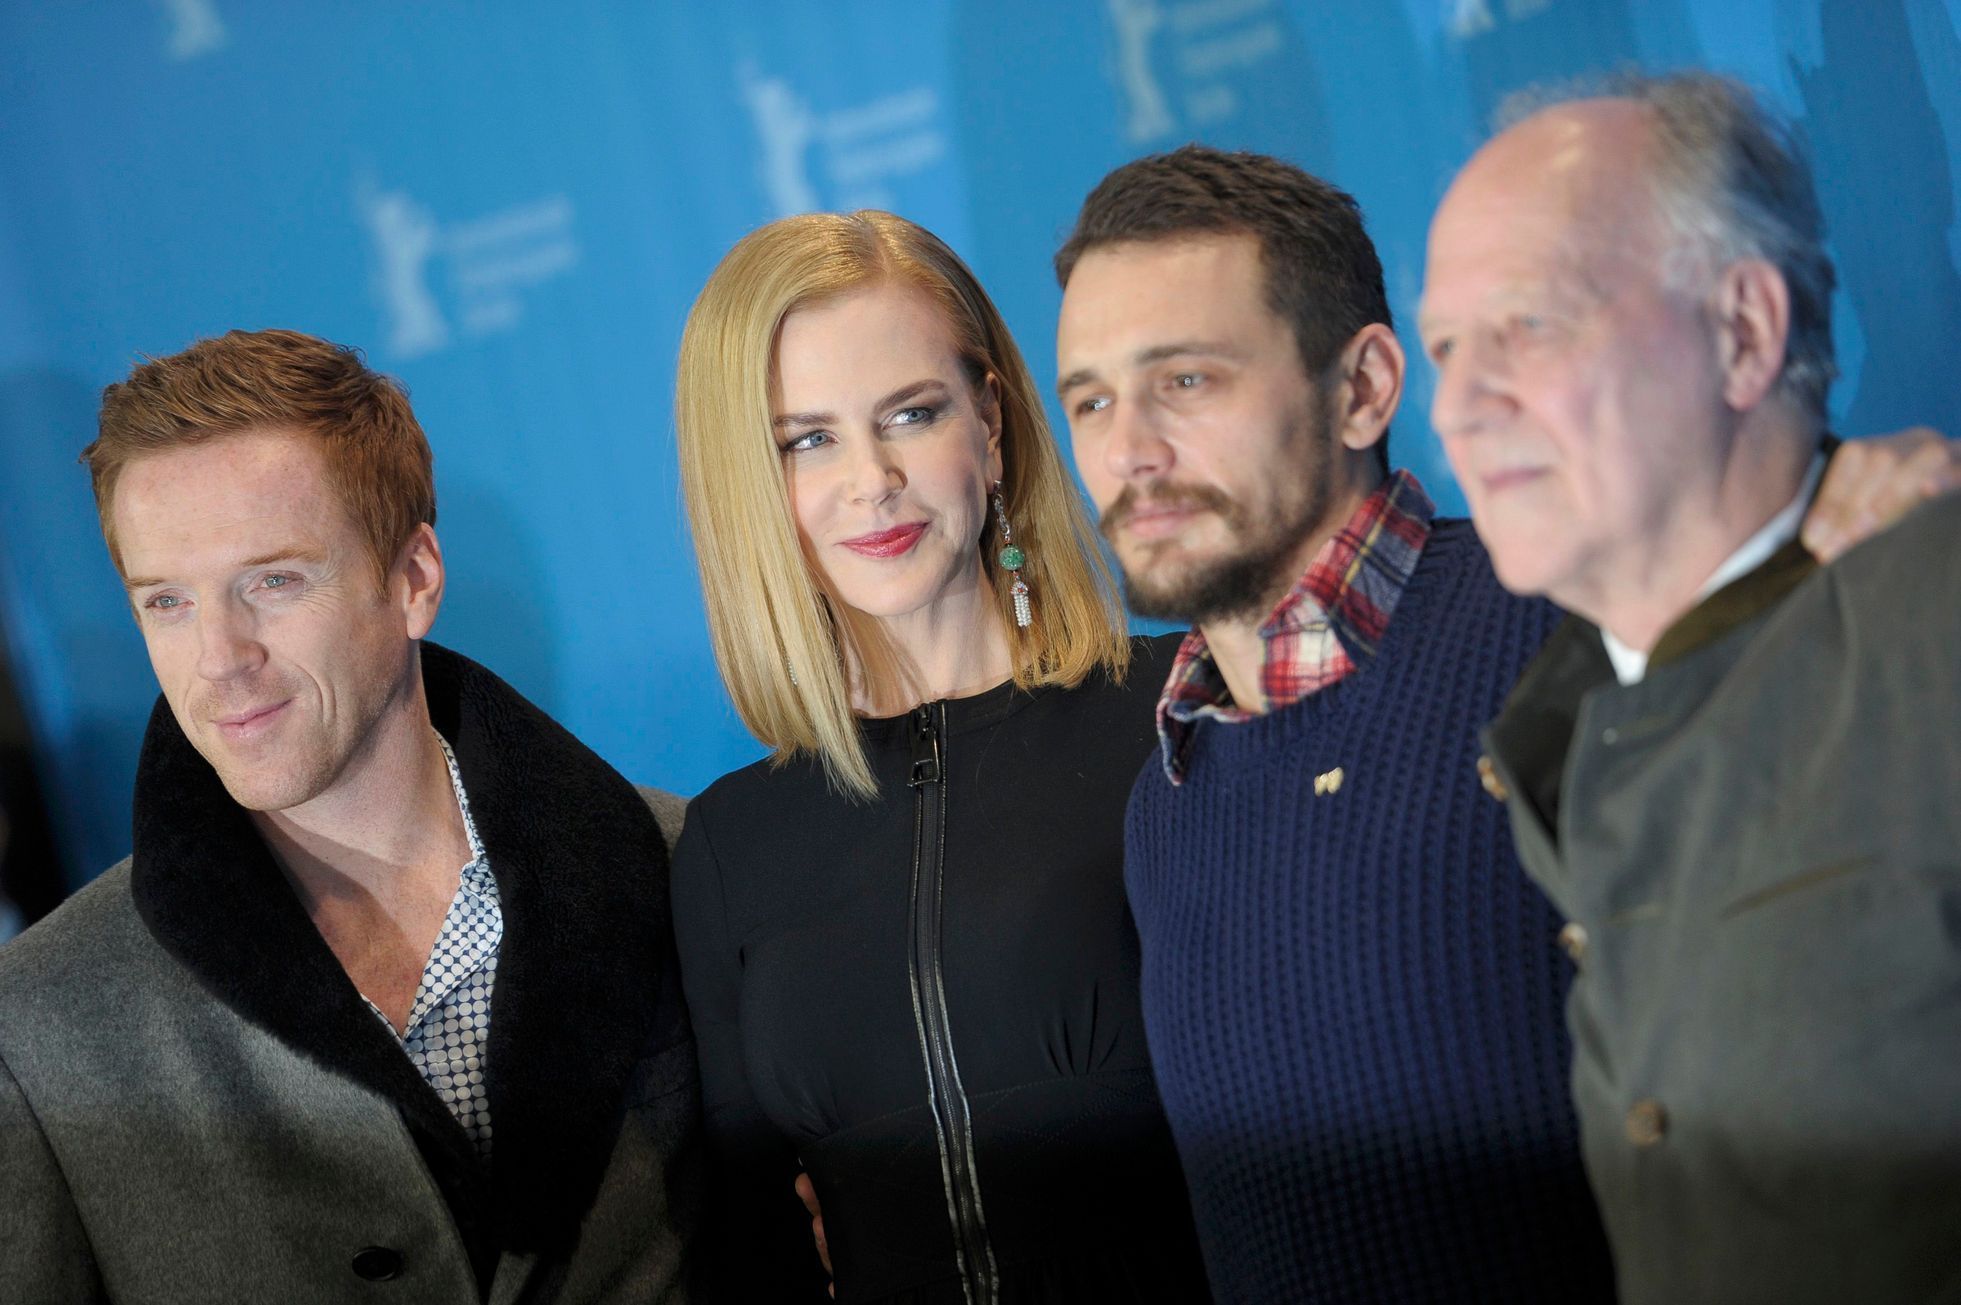 Actors Lewis Kidman Franco and director Herzog pose during photocall at 65th Berlinale International Film Festival in Berlin